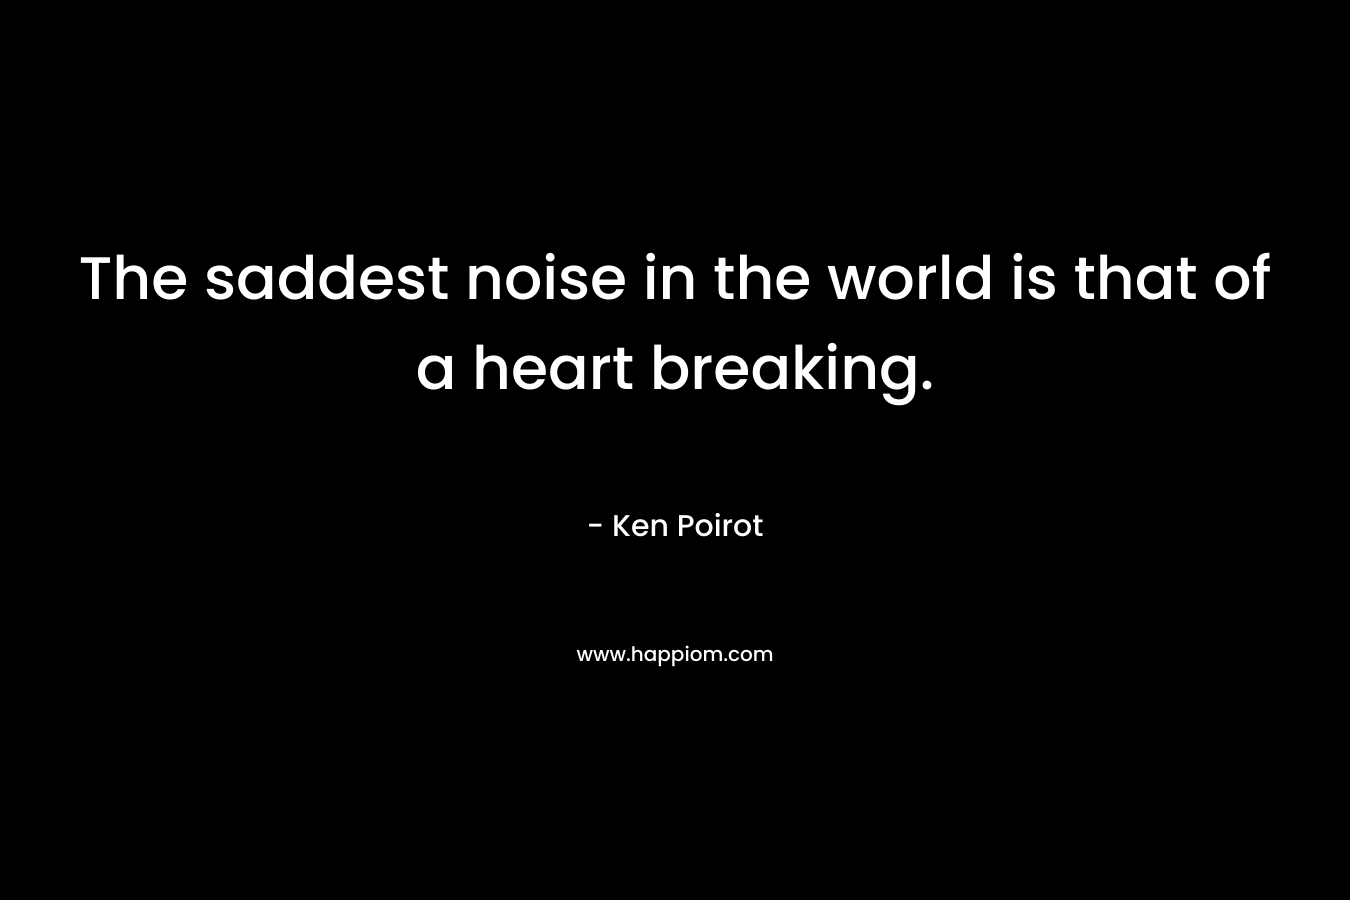 The saddest noise in the world is that of a heart breaking.